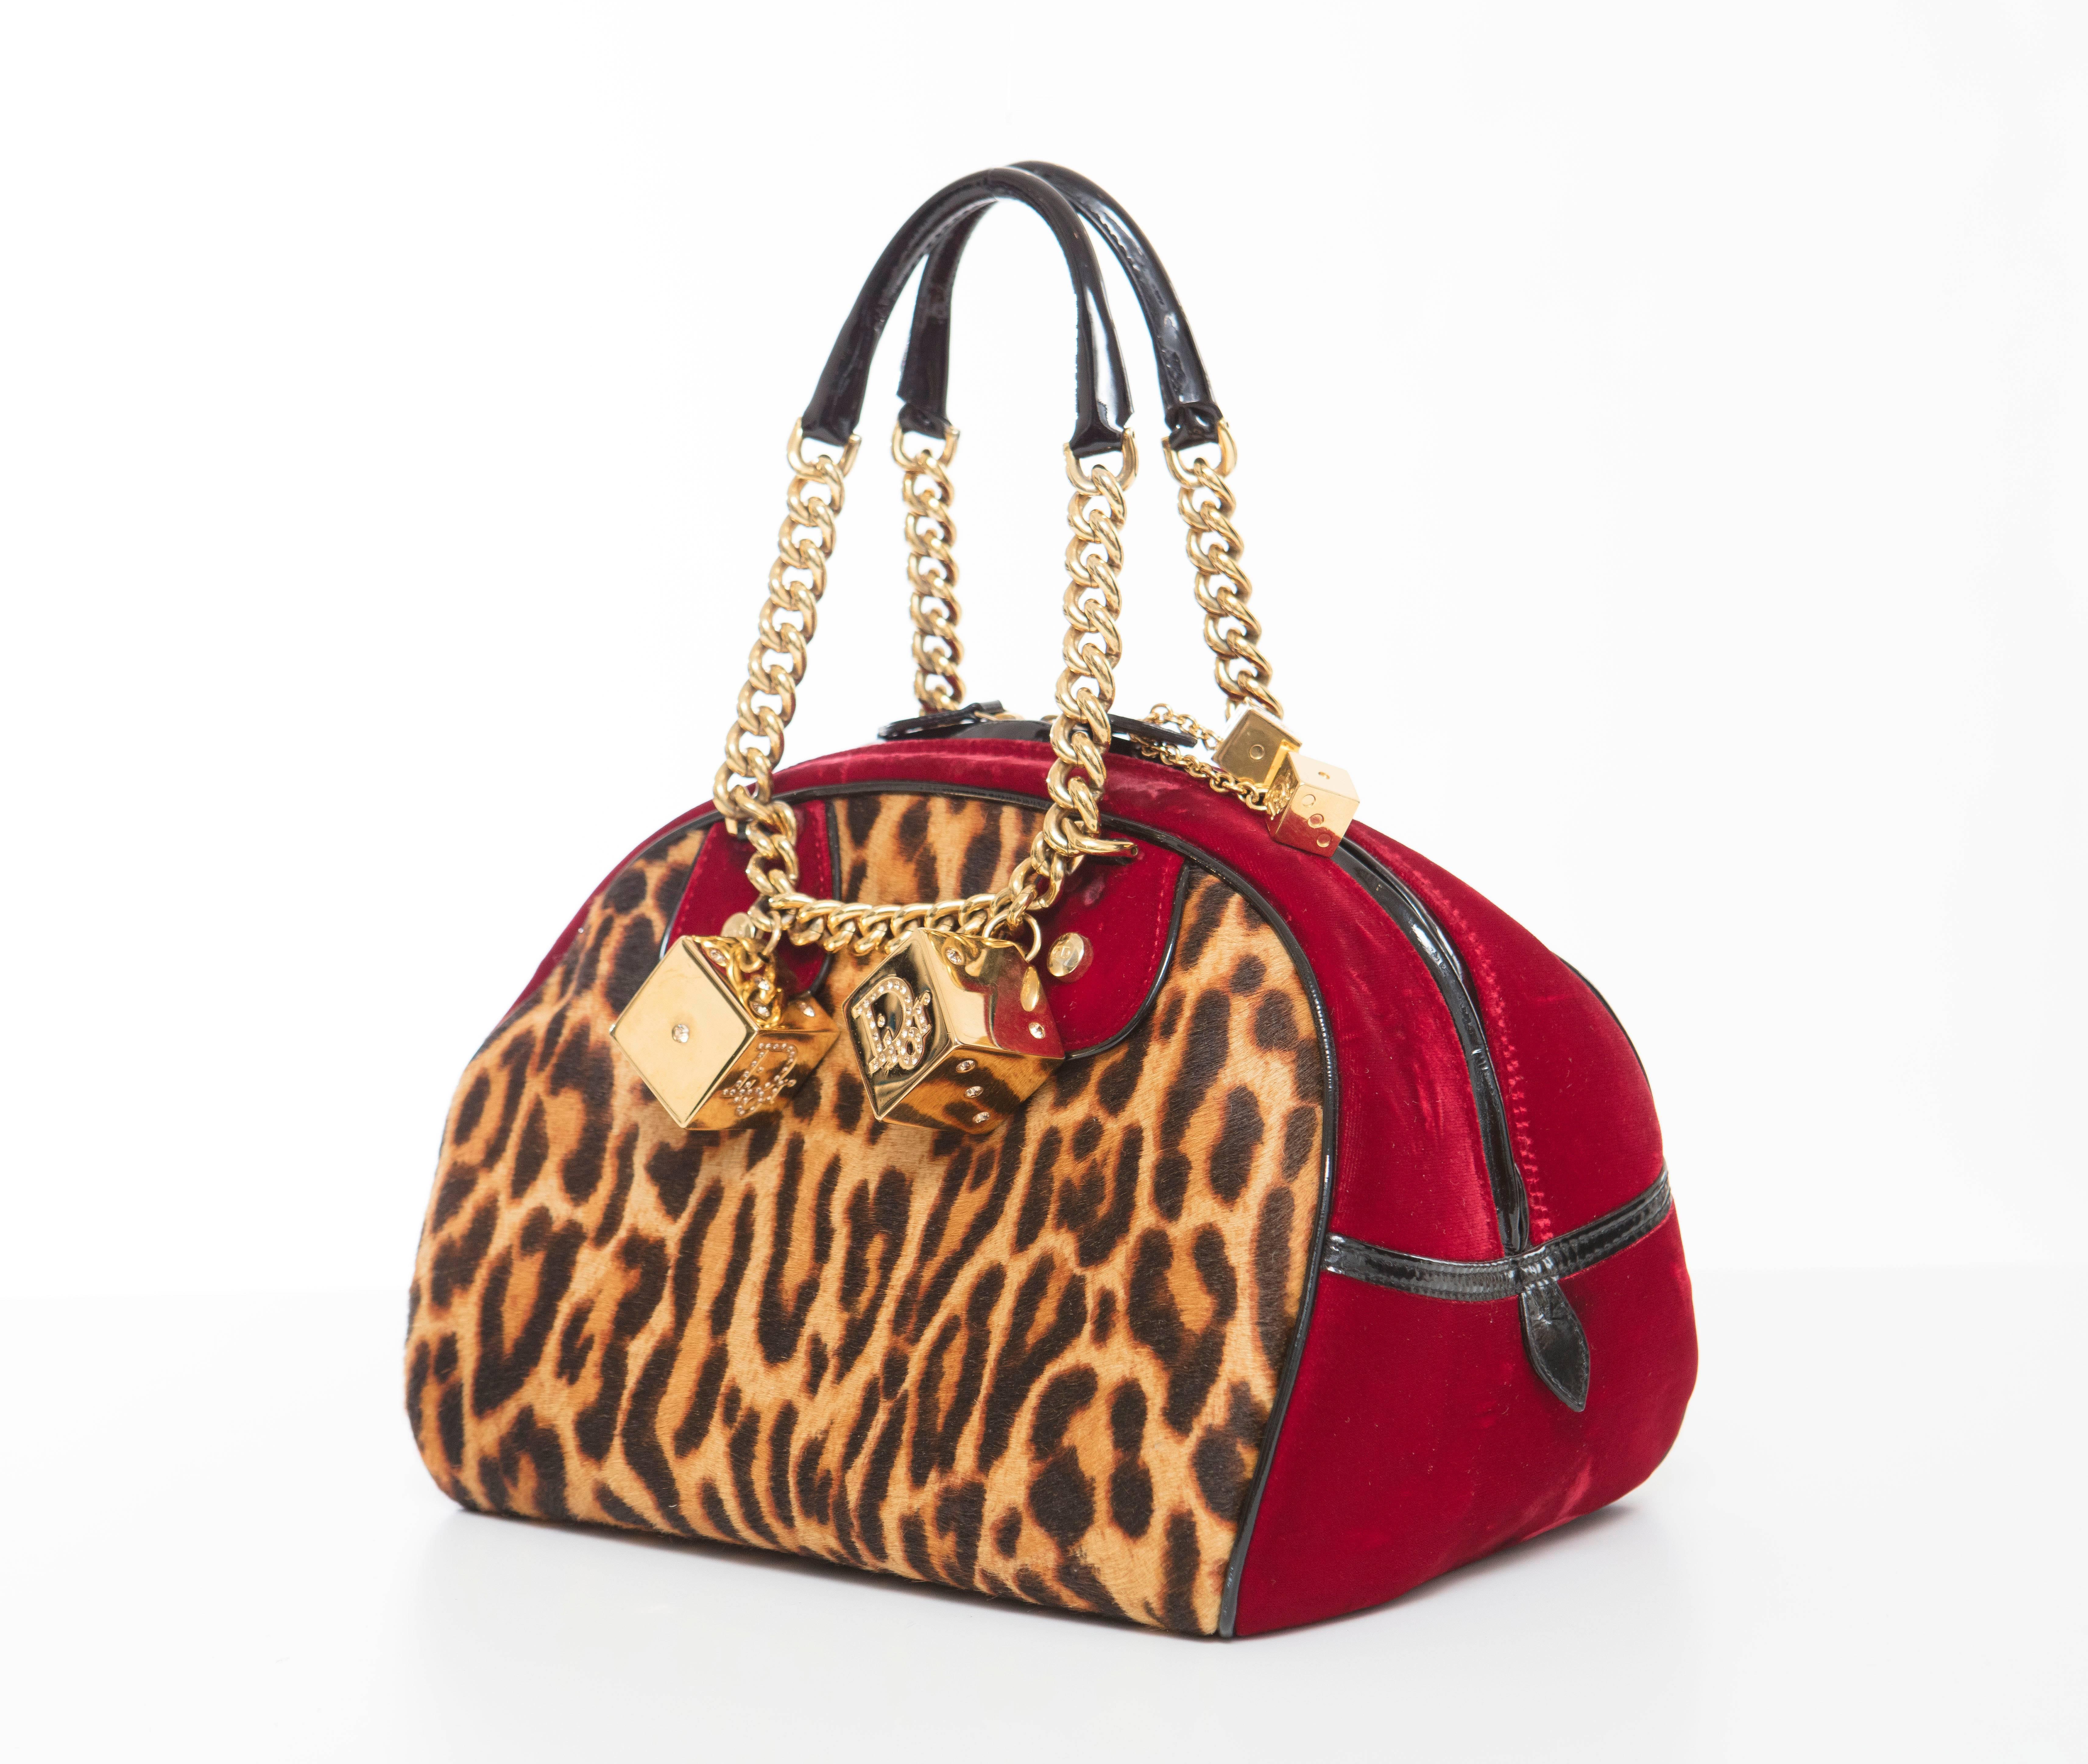 John Galliano for Christian Dior, Fall 2004 leopard Gambler bag with gold-tone hardware,  velvet and black patent leather trim, dual rolled top handles featuring chain-link accents, crystal embellished dice adornments at front face, black Diorissimo